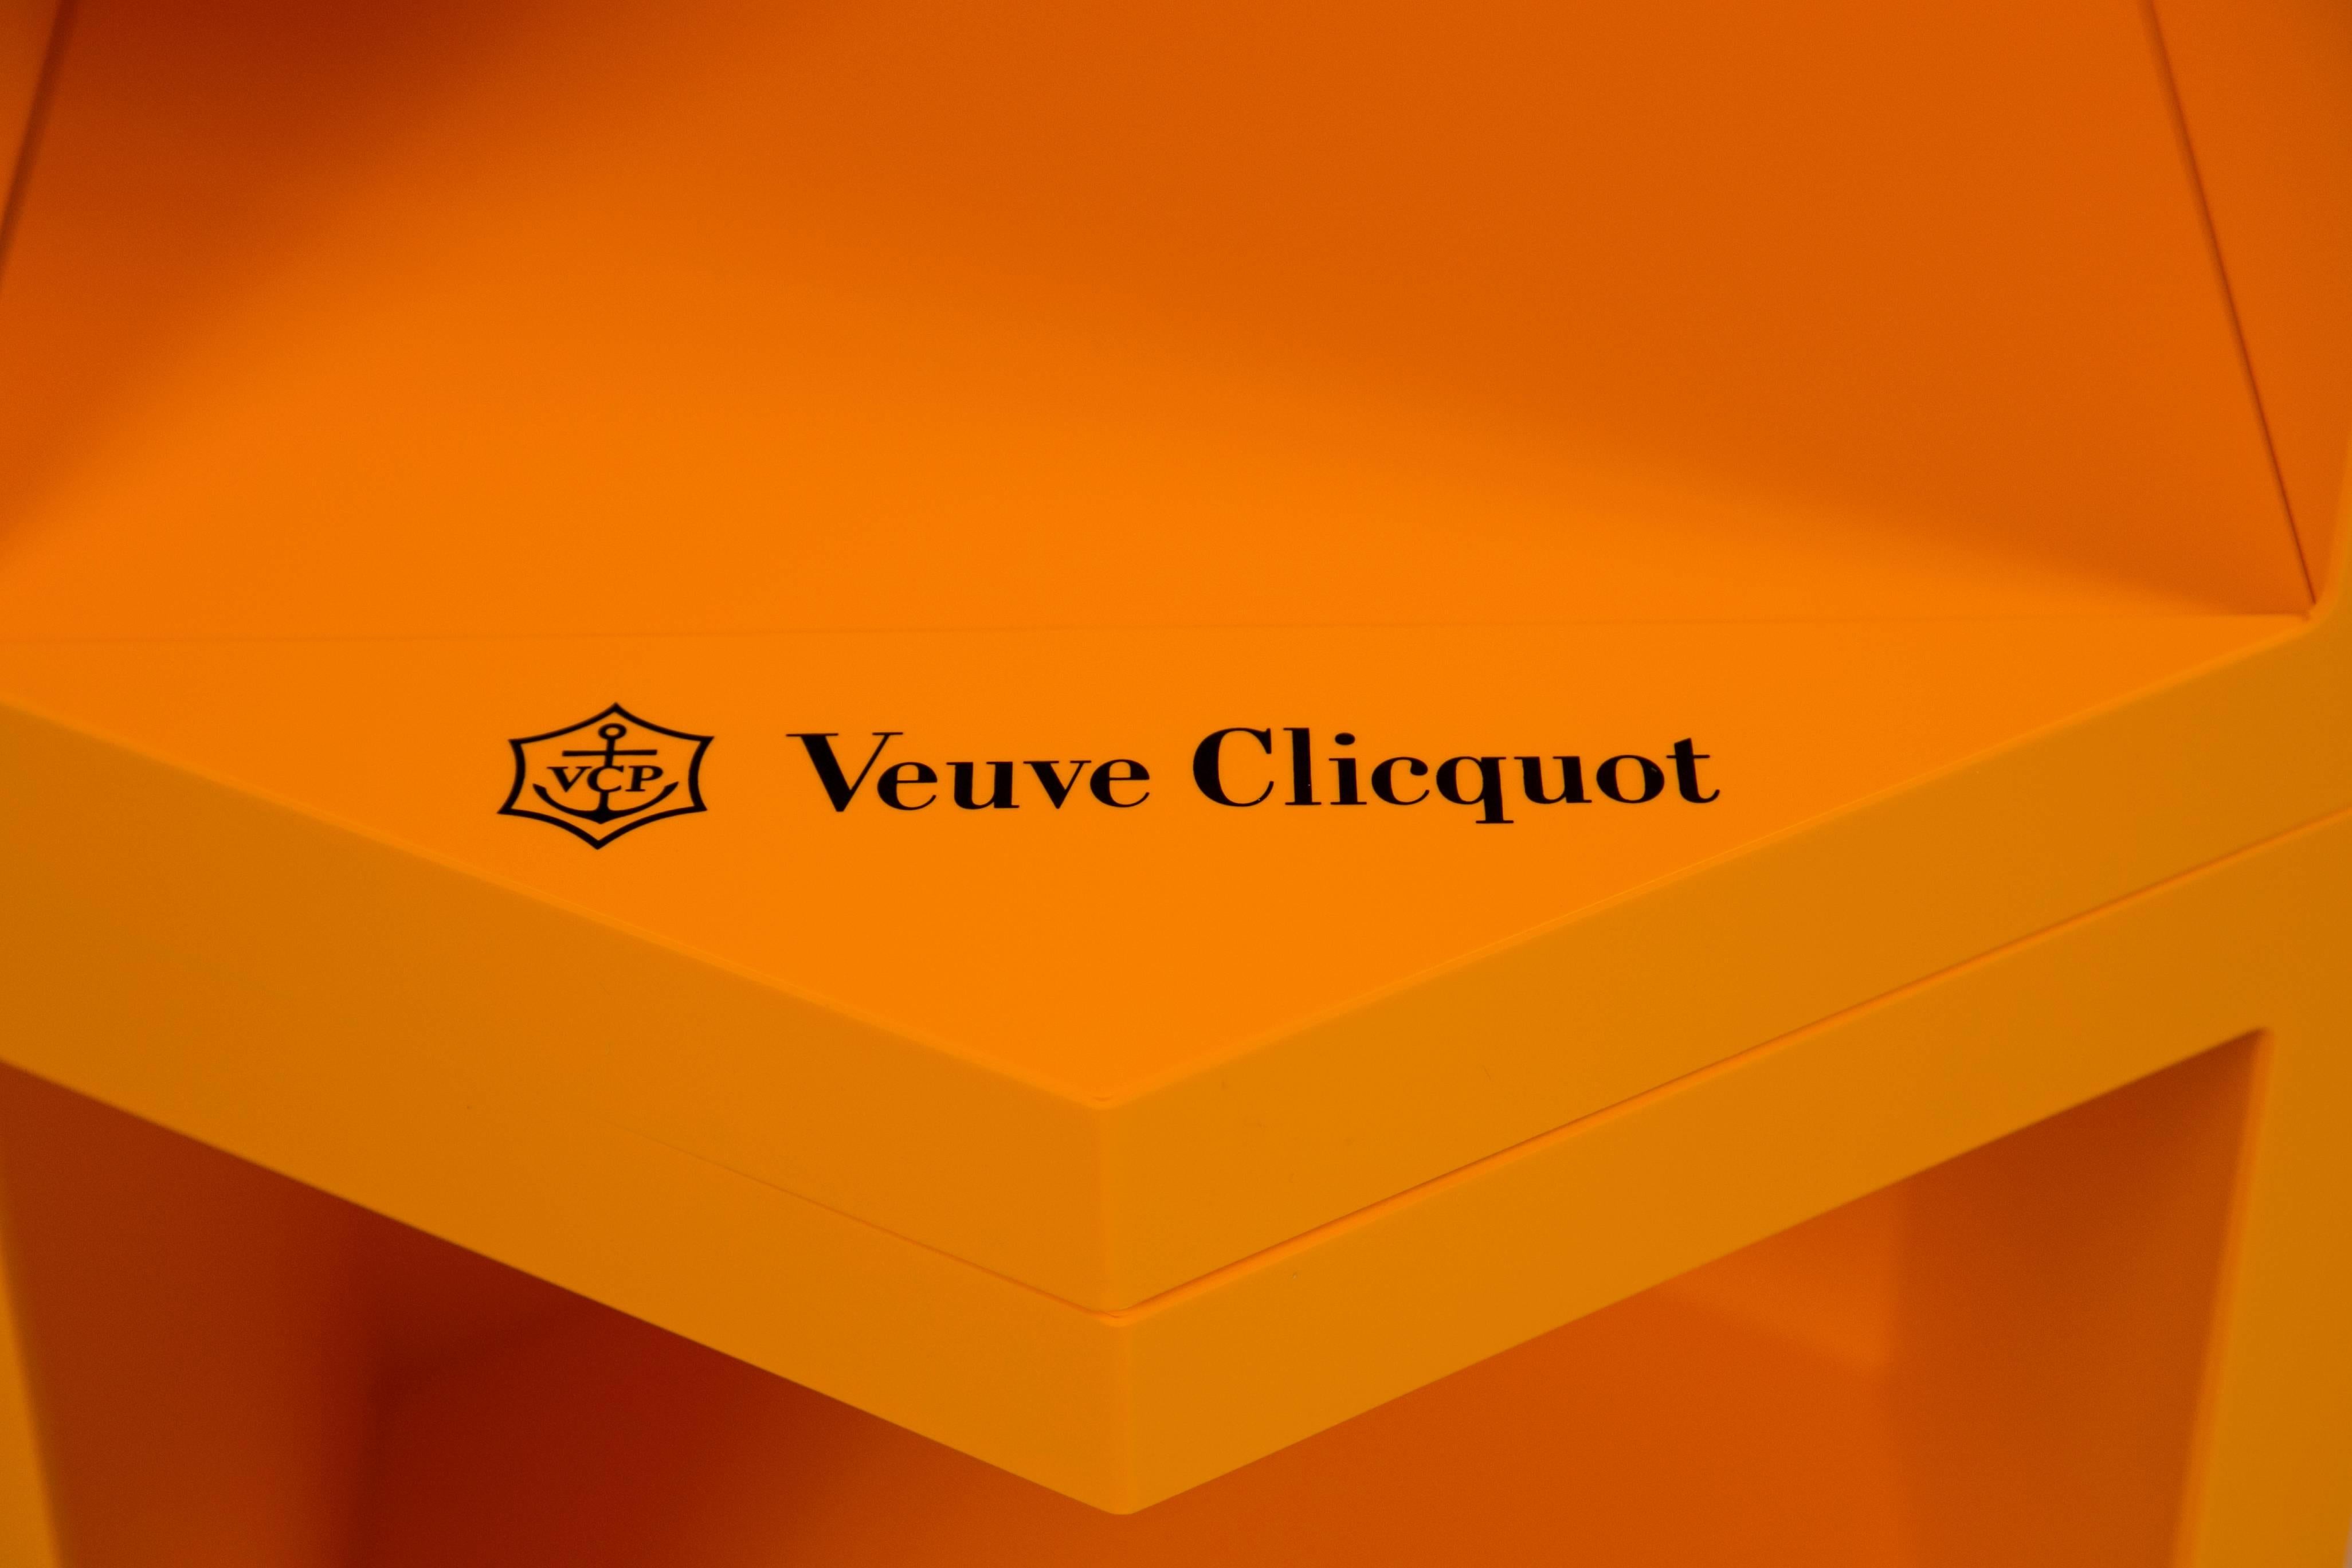 veuve clicquot table and chairs